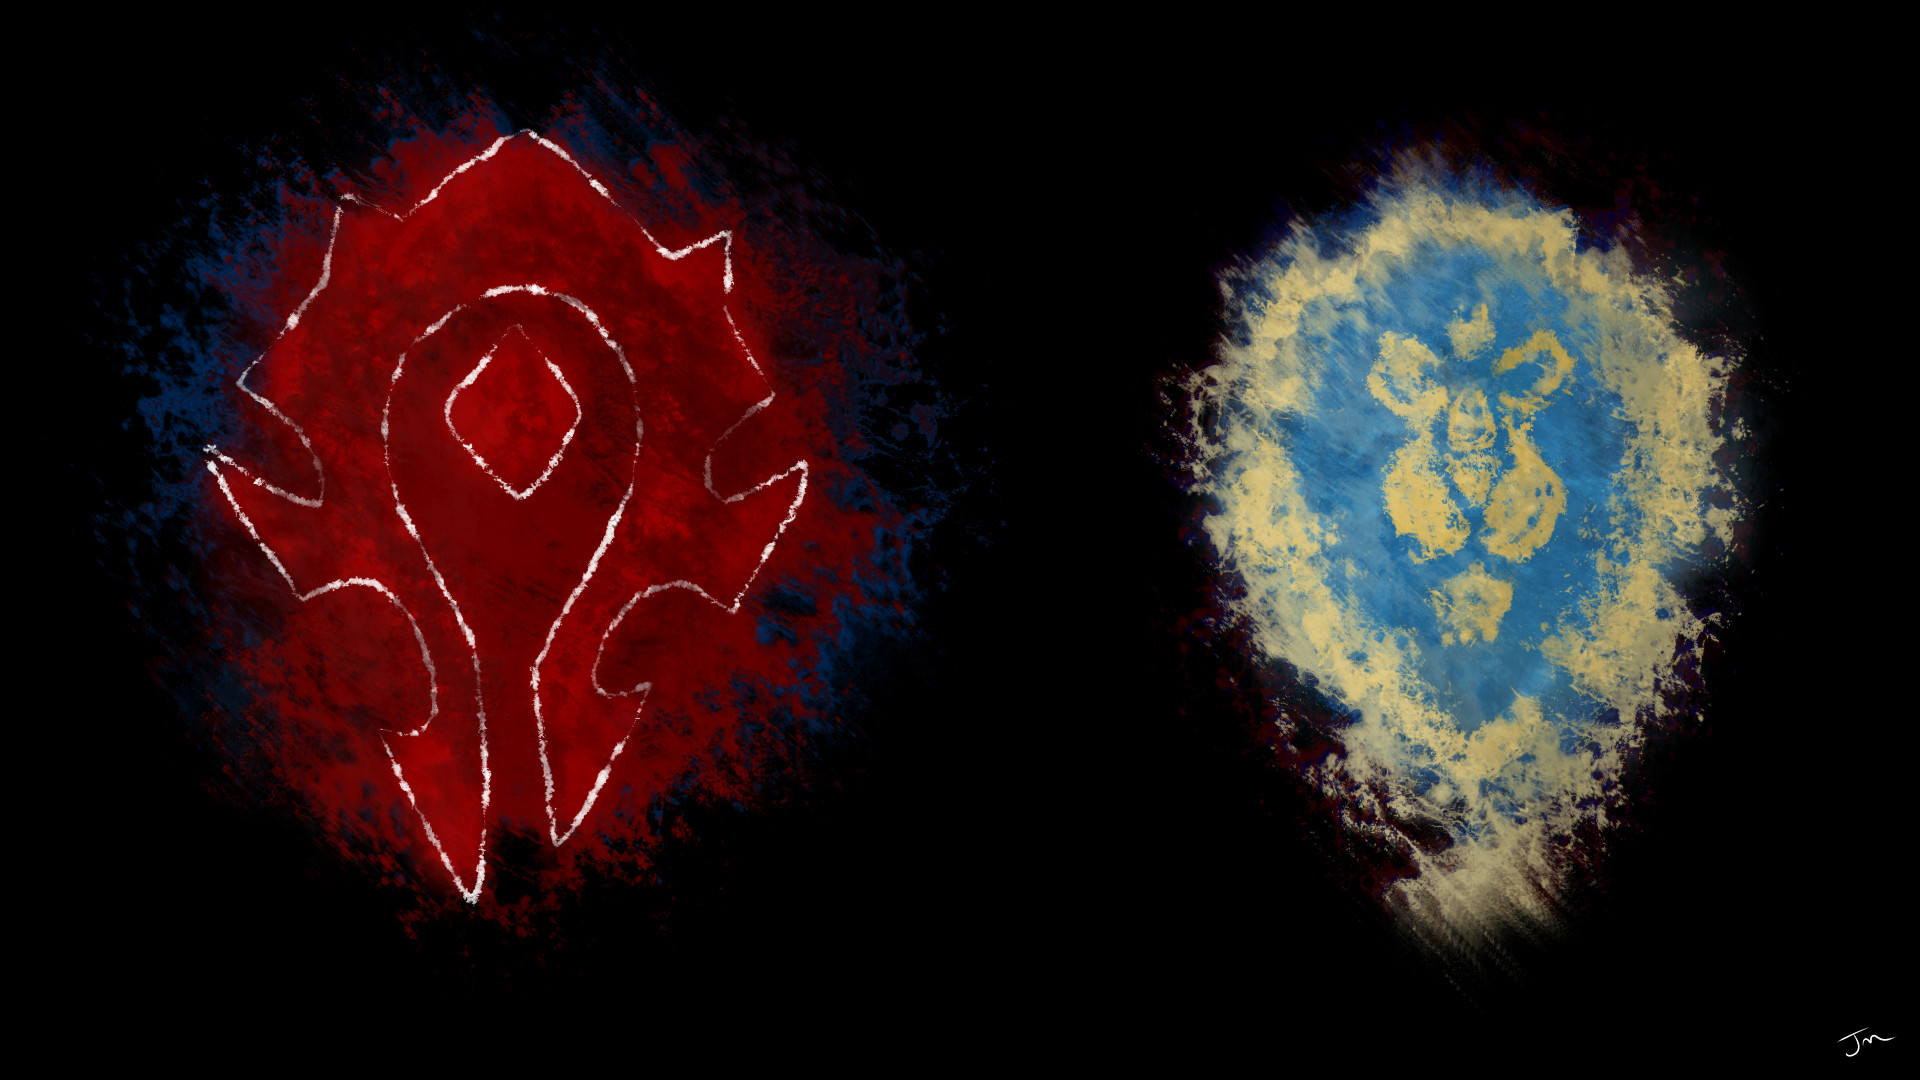 Alliance/Horde wallpaper I made! (1920 x 1080) Need #iPhone #